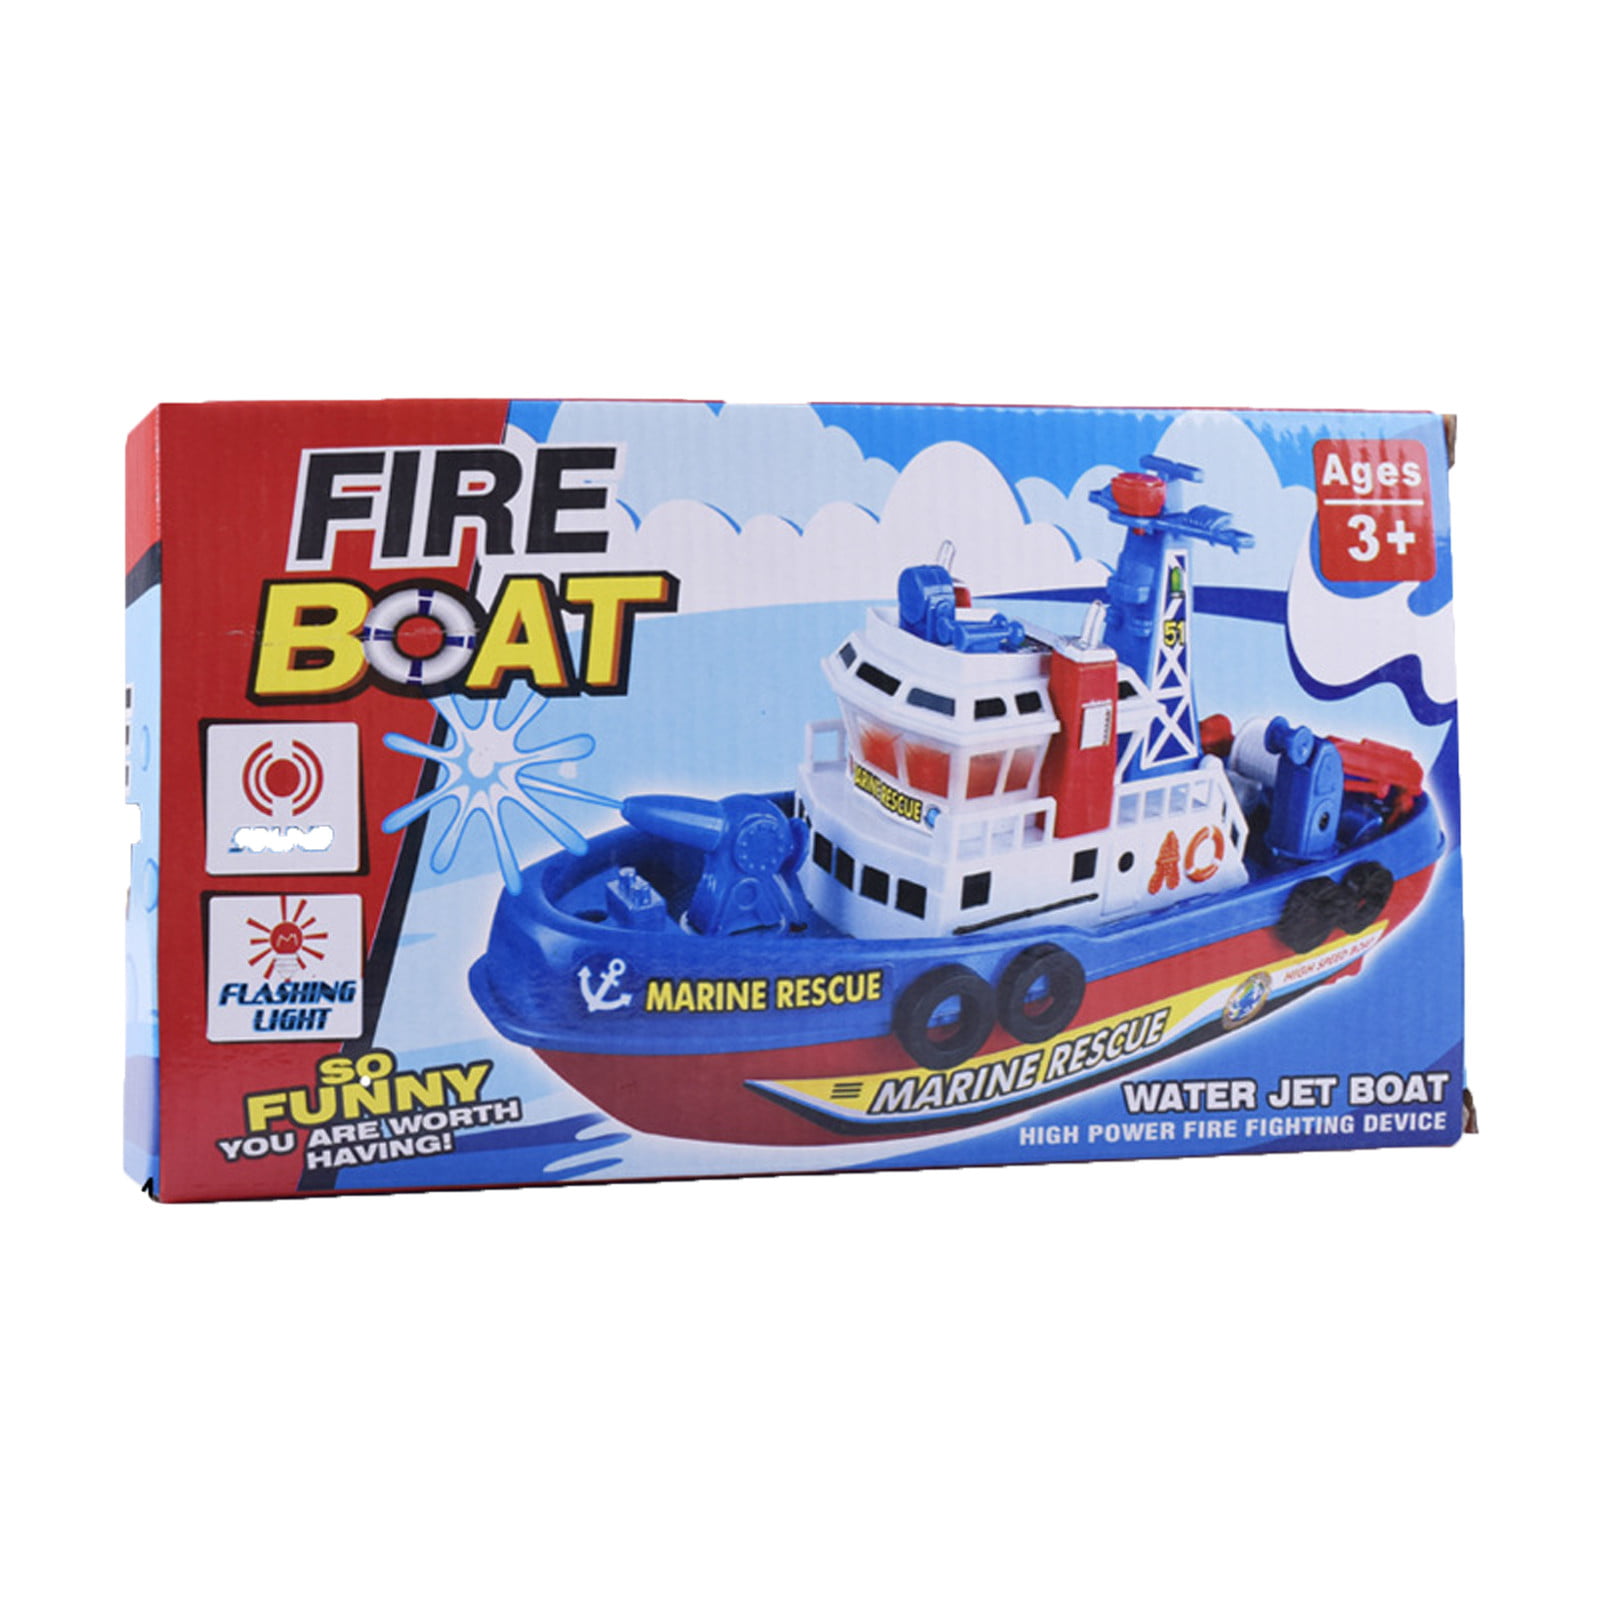 Blue Flashing Electric Fire Boat Baby Bath Toy LED Light Kids Gift Model New 